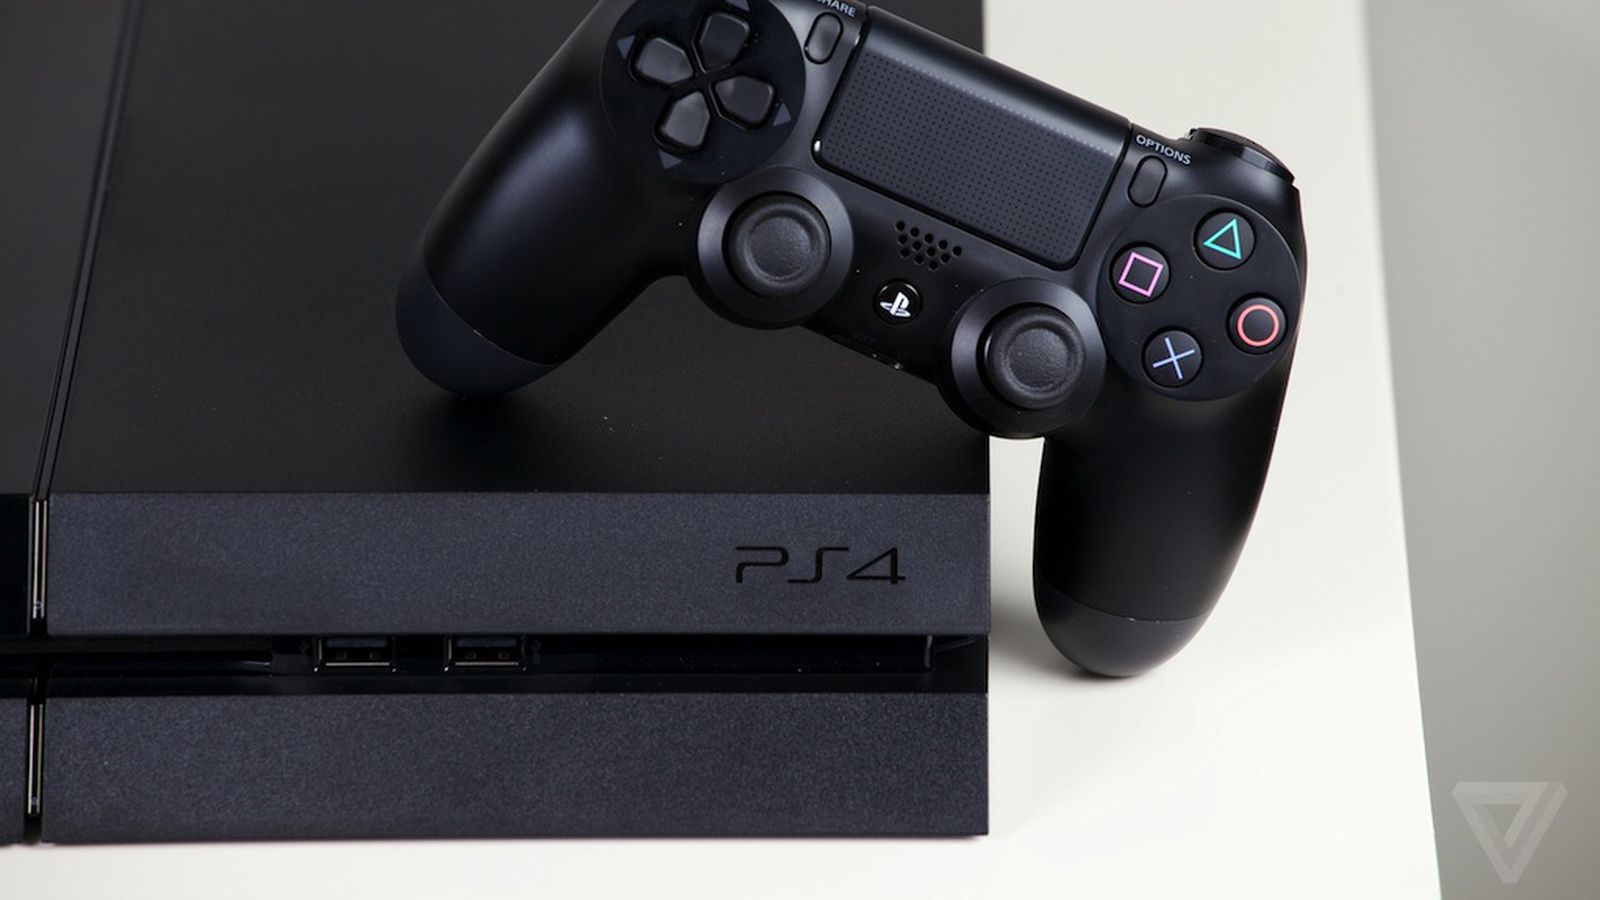 Sony cuts PlayStation 4 price by $50 in the US - The Verge1600 x 900